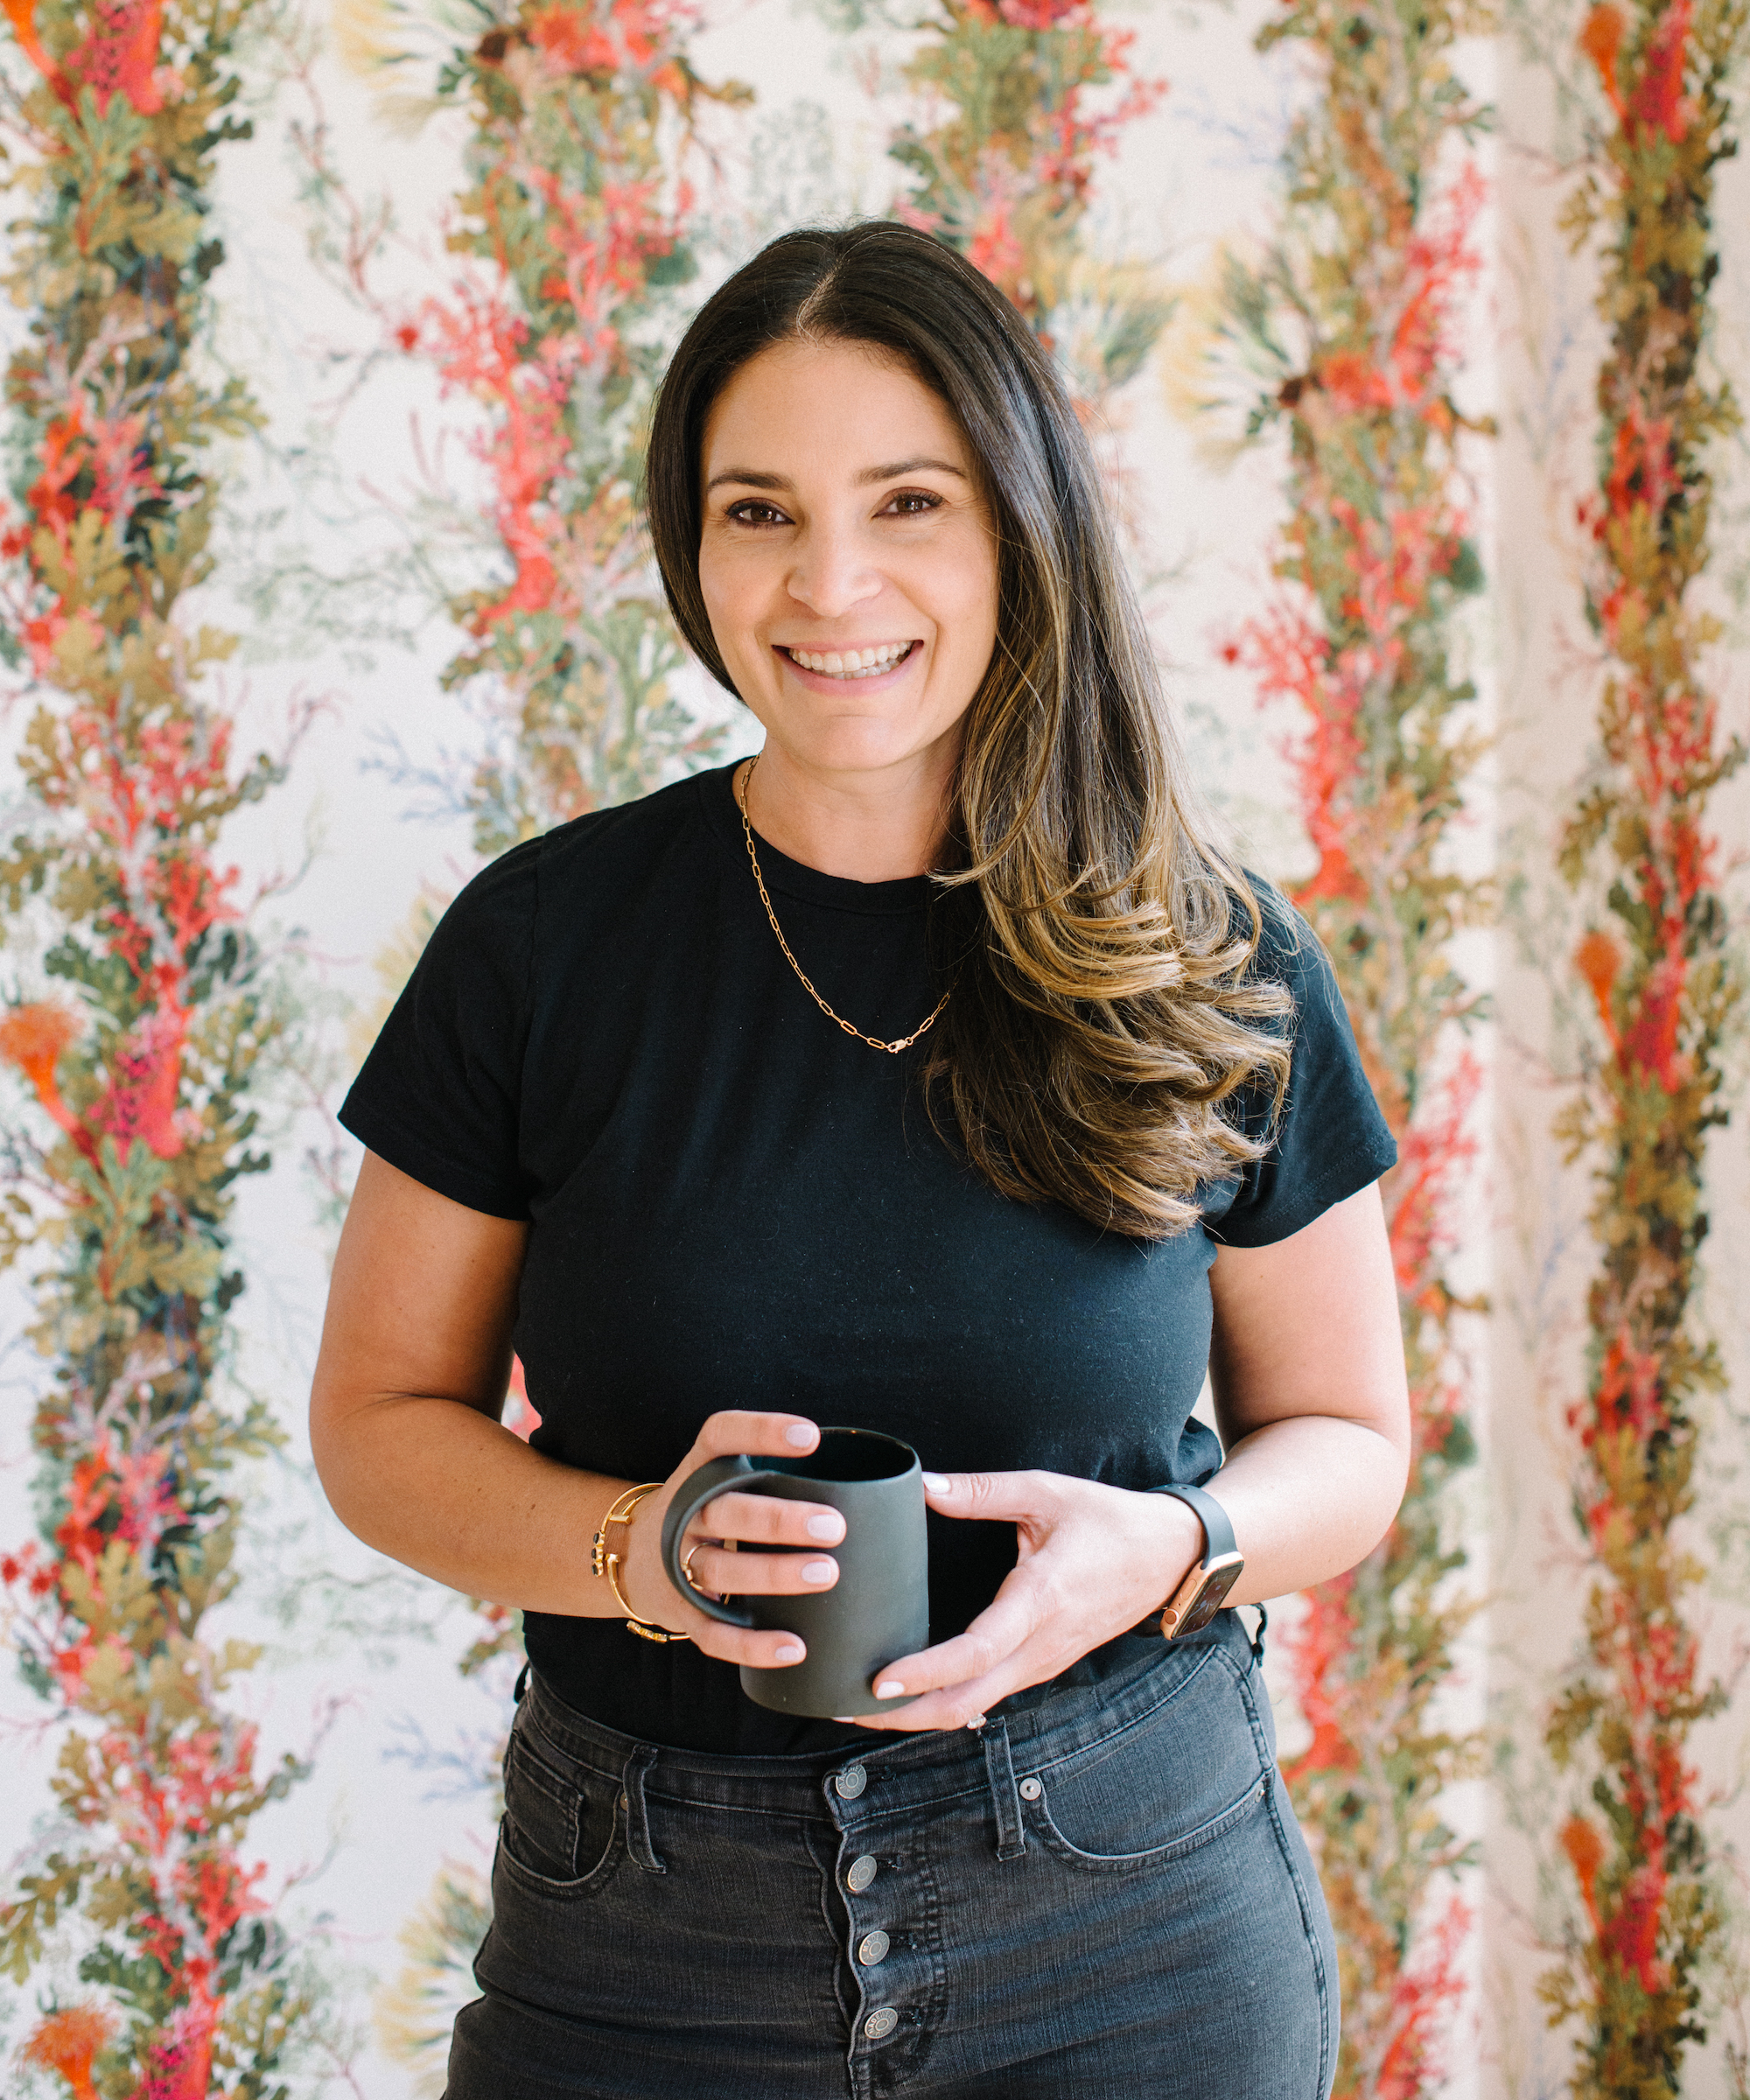 Elsa Ebert, founder and CEO of Composed Living is a woman with long dark hari in a black T-shirt and jeans standing in front of a floral trail wallpaper